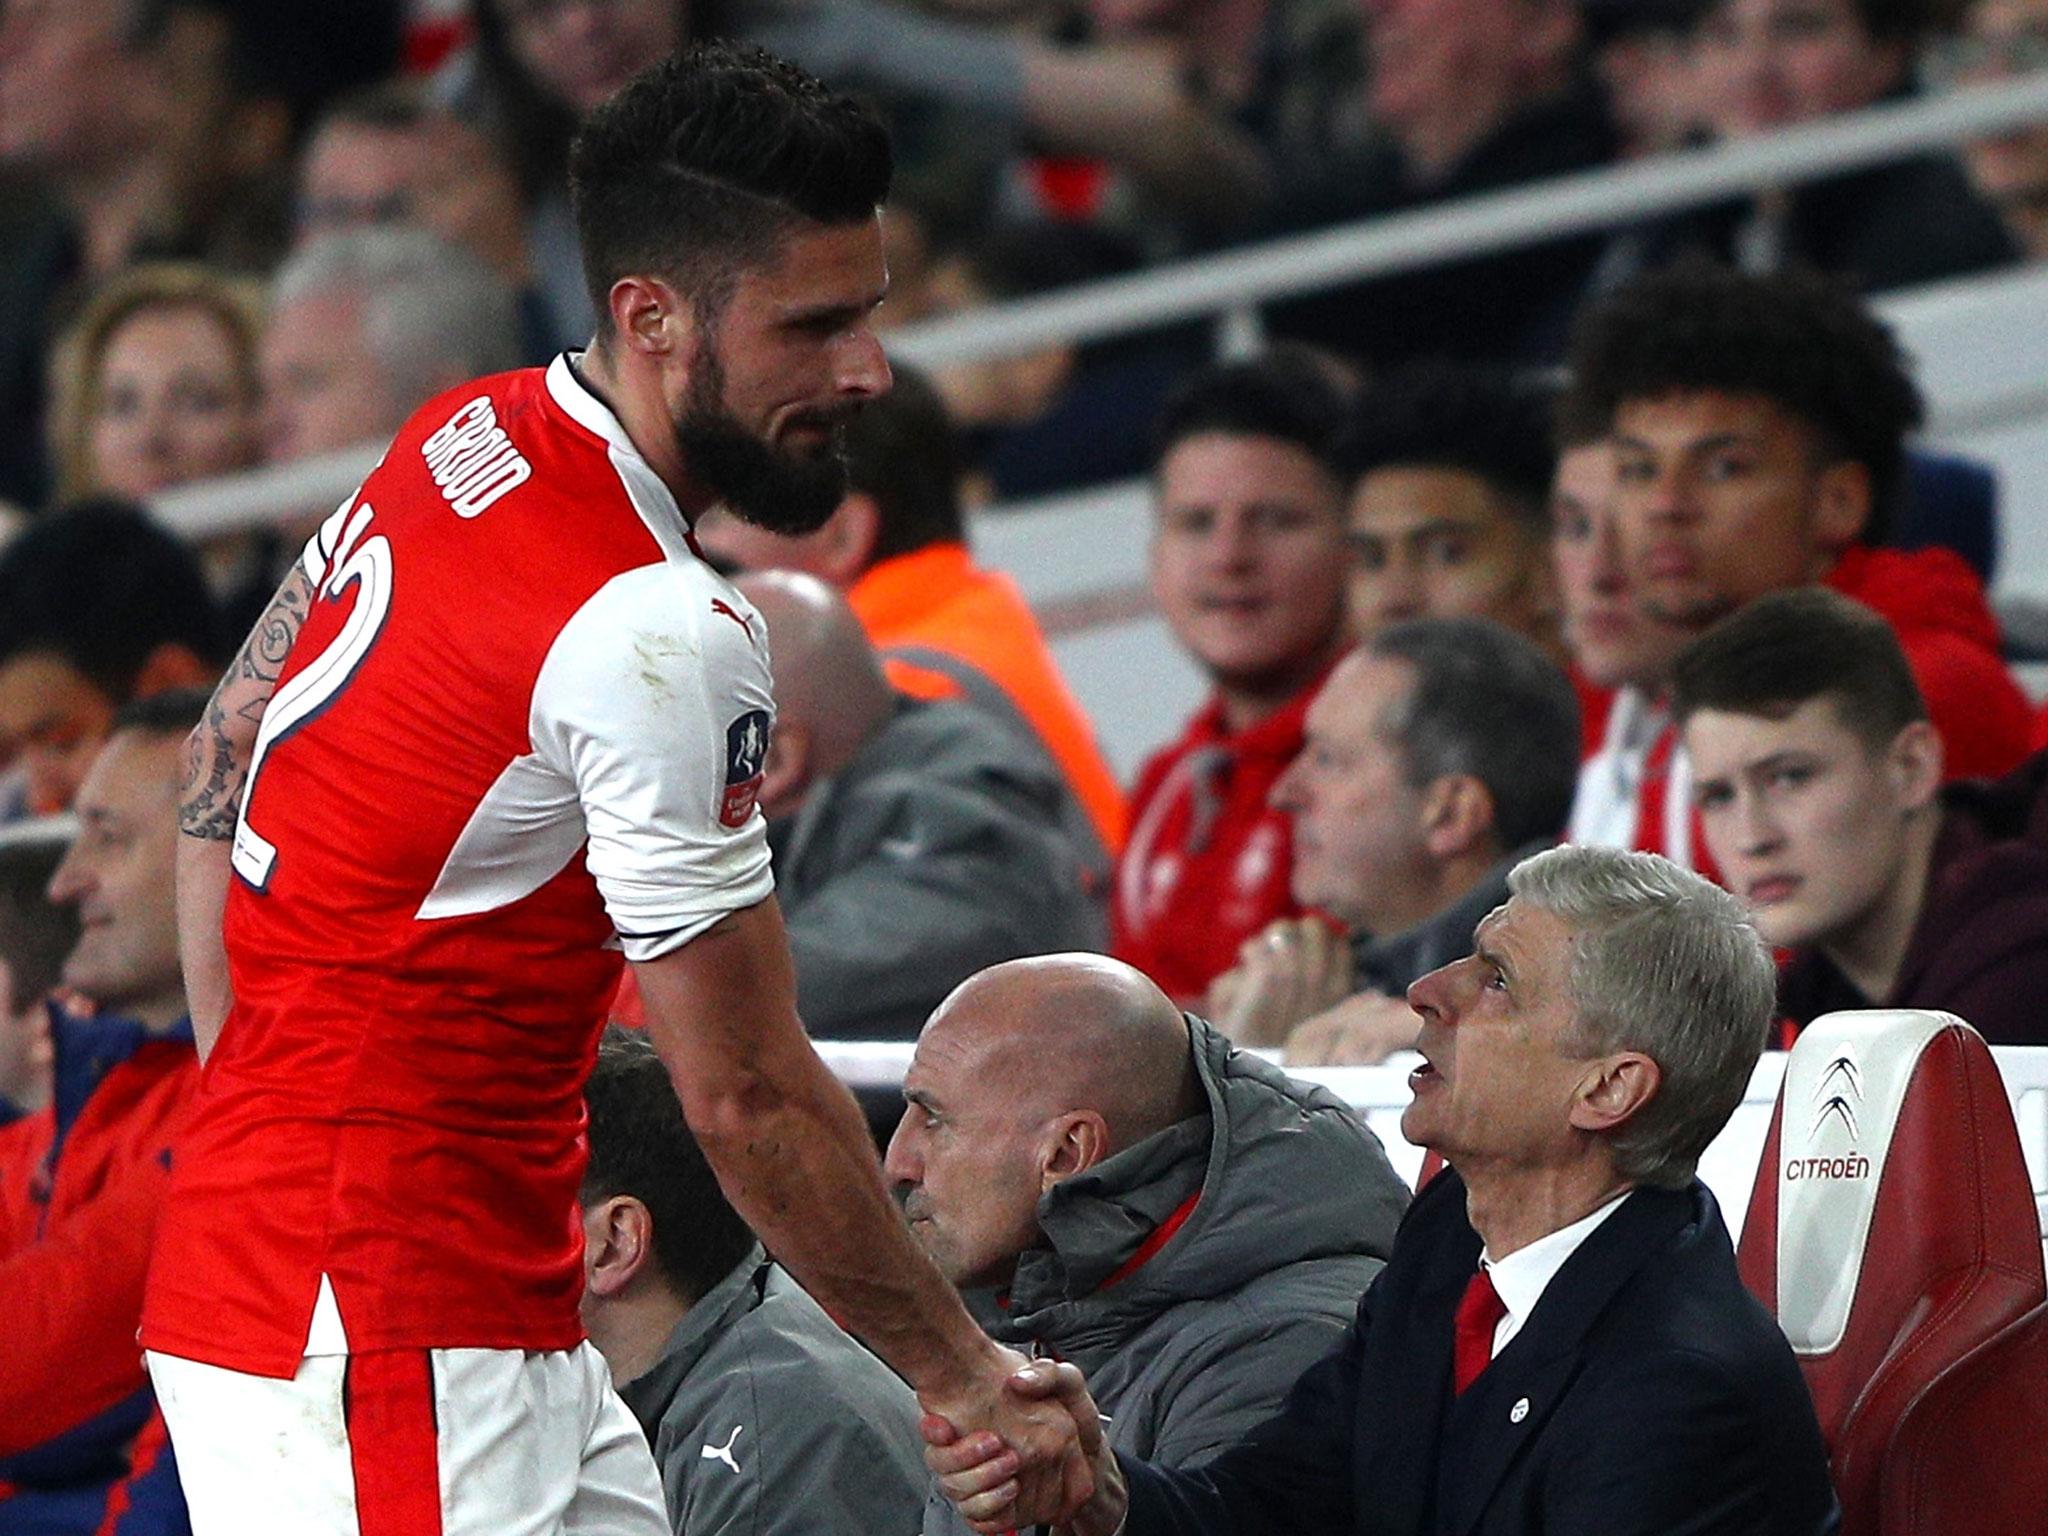 Giroud will have talks with Arsene Wenger over his future at the club